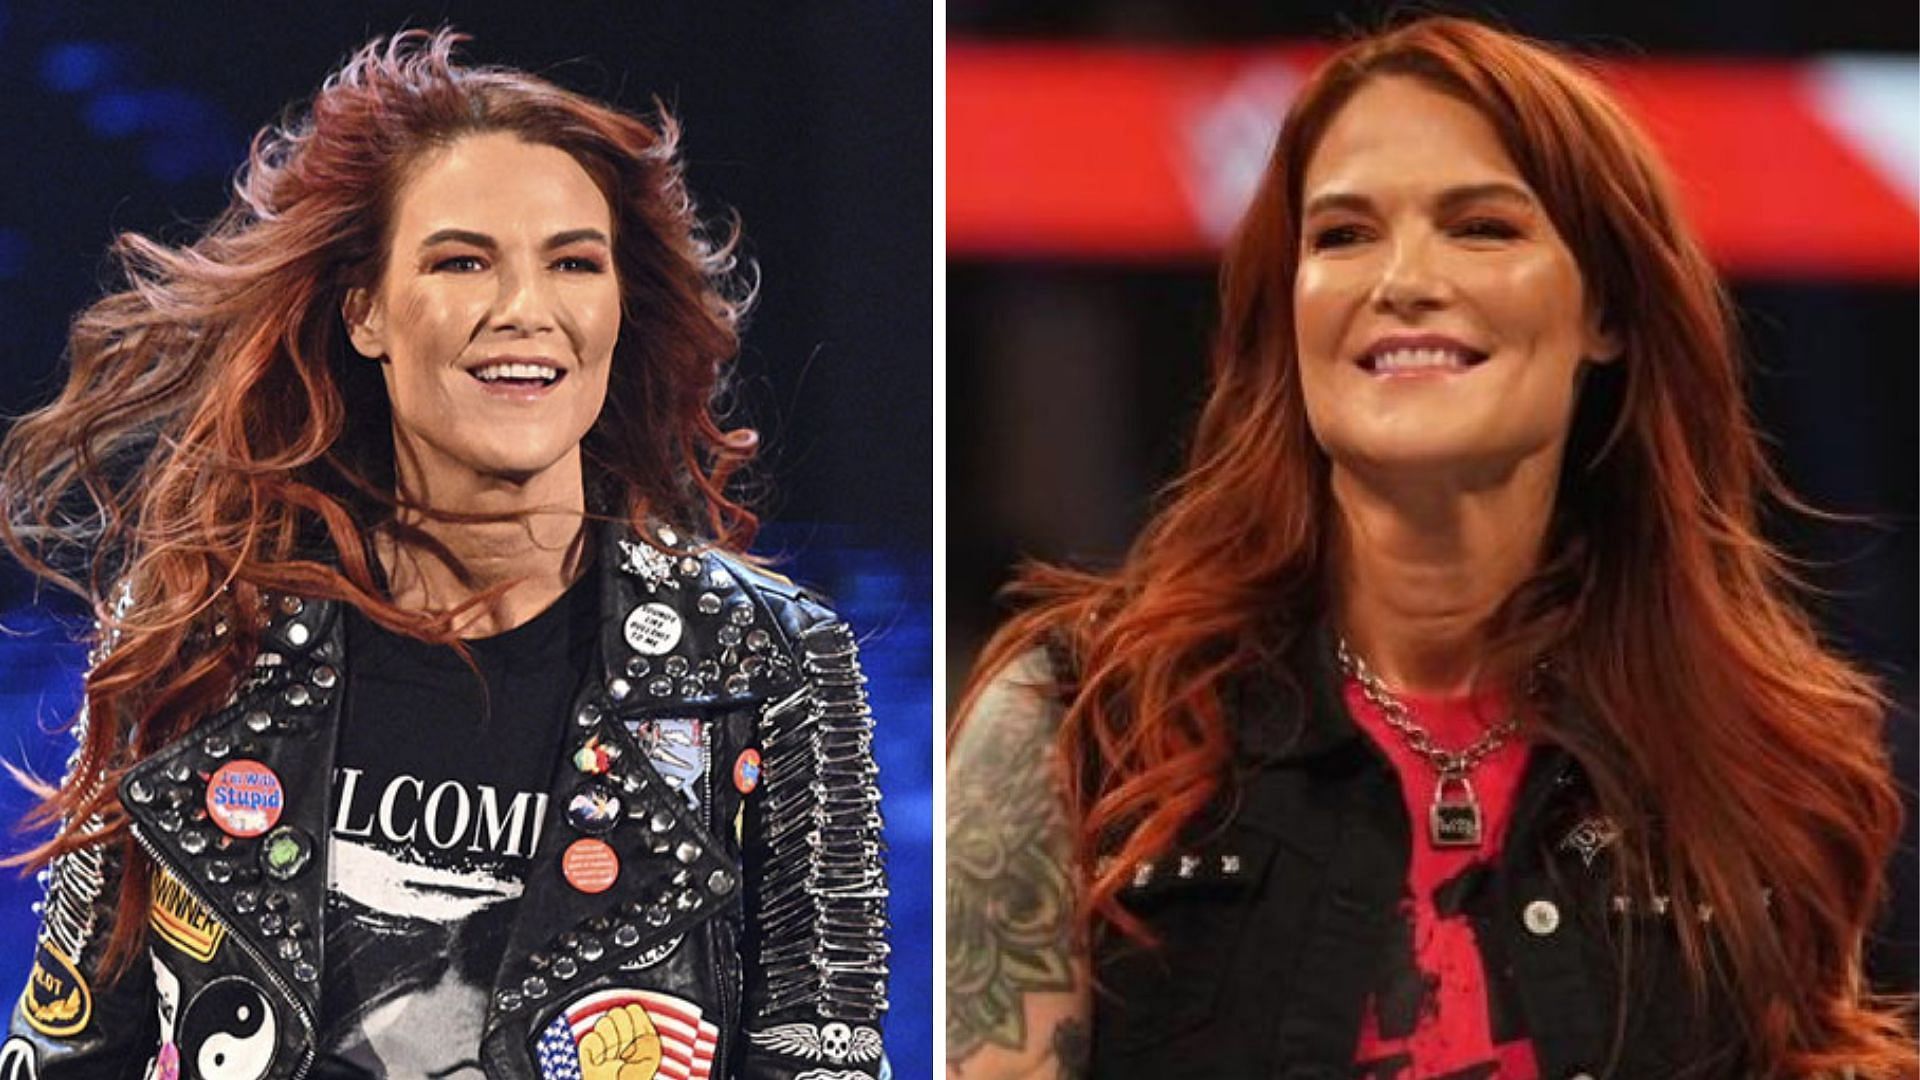 Lita was inducted into the WWE Hall of Fame in 2014.